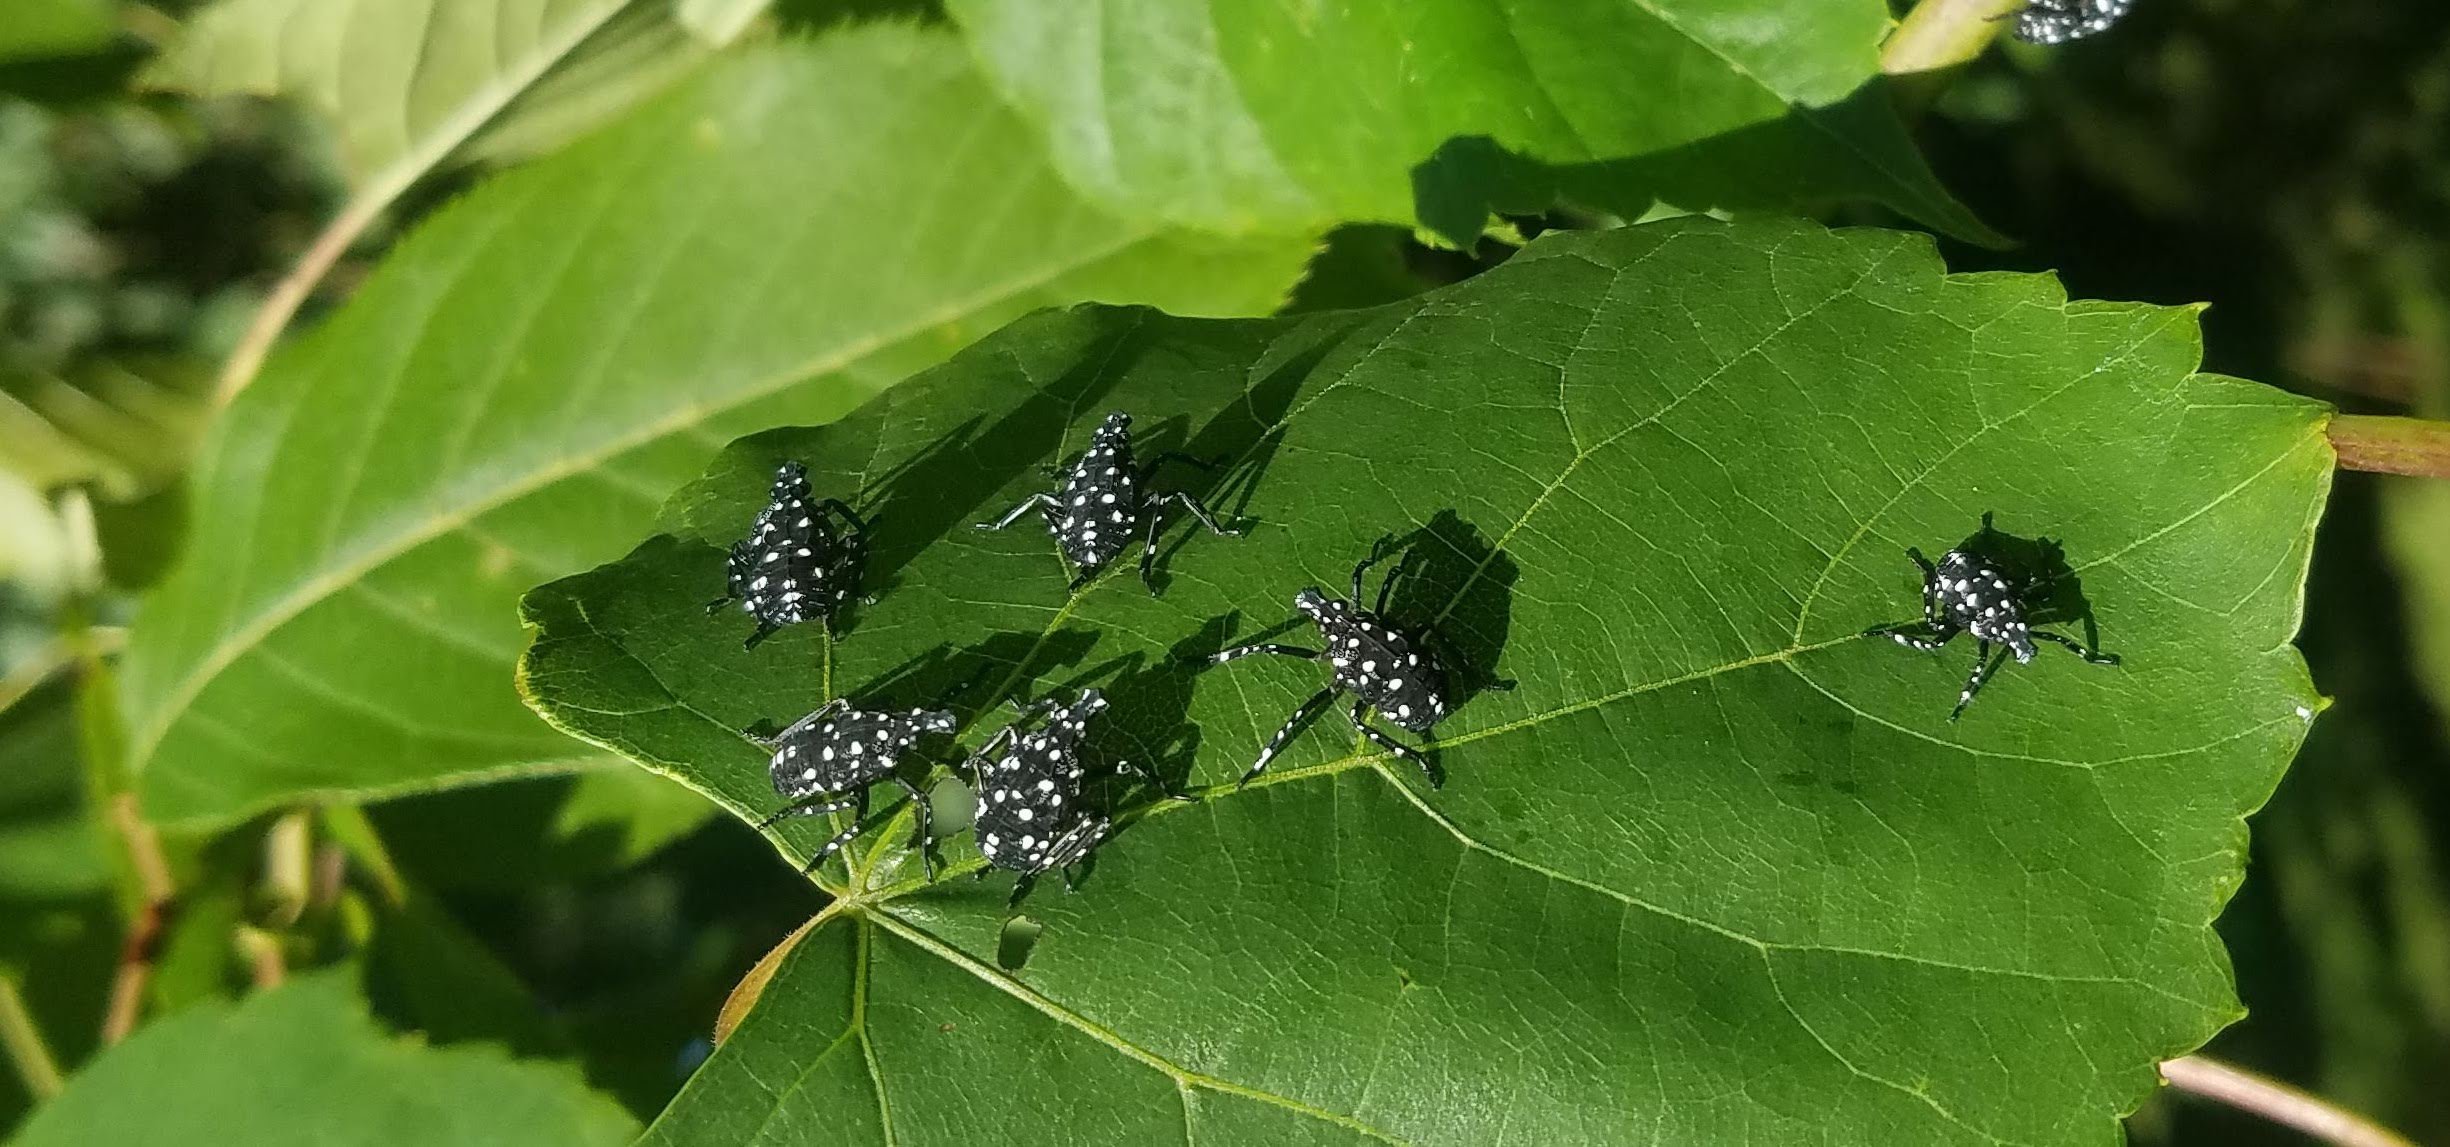 young spotted lanternfly